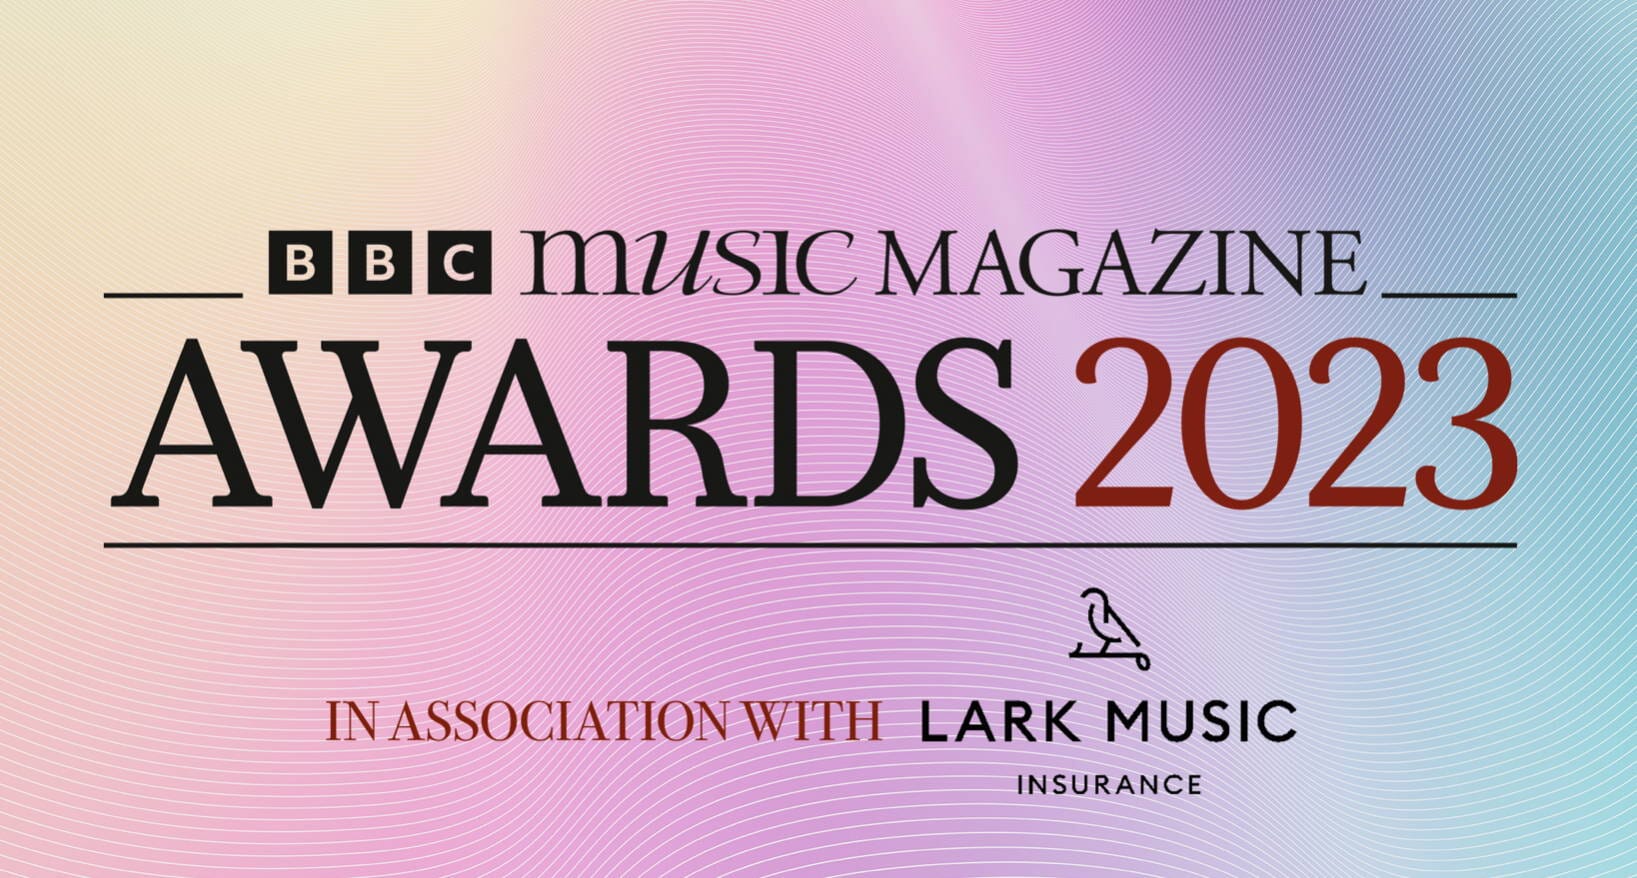 Two albums nominated in 2023 BBC Music Magazine Awards